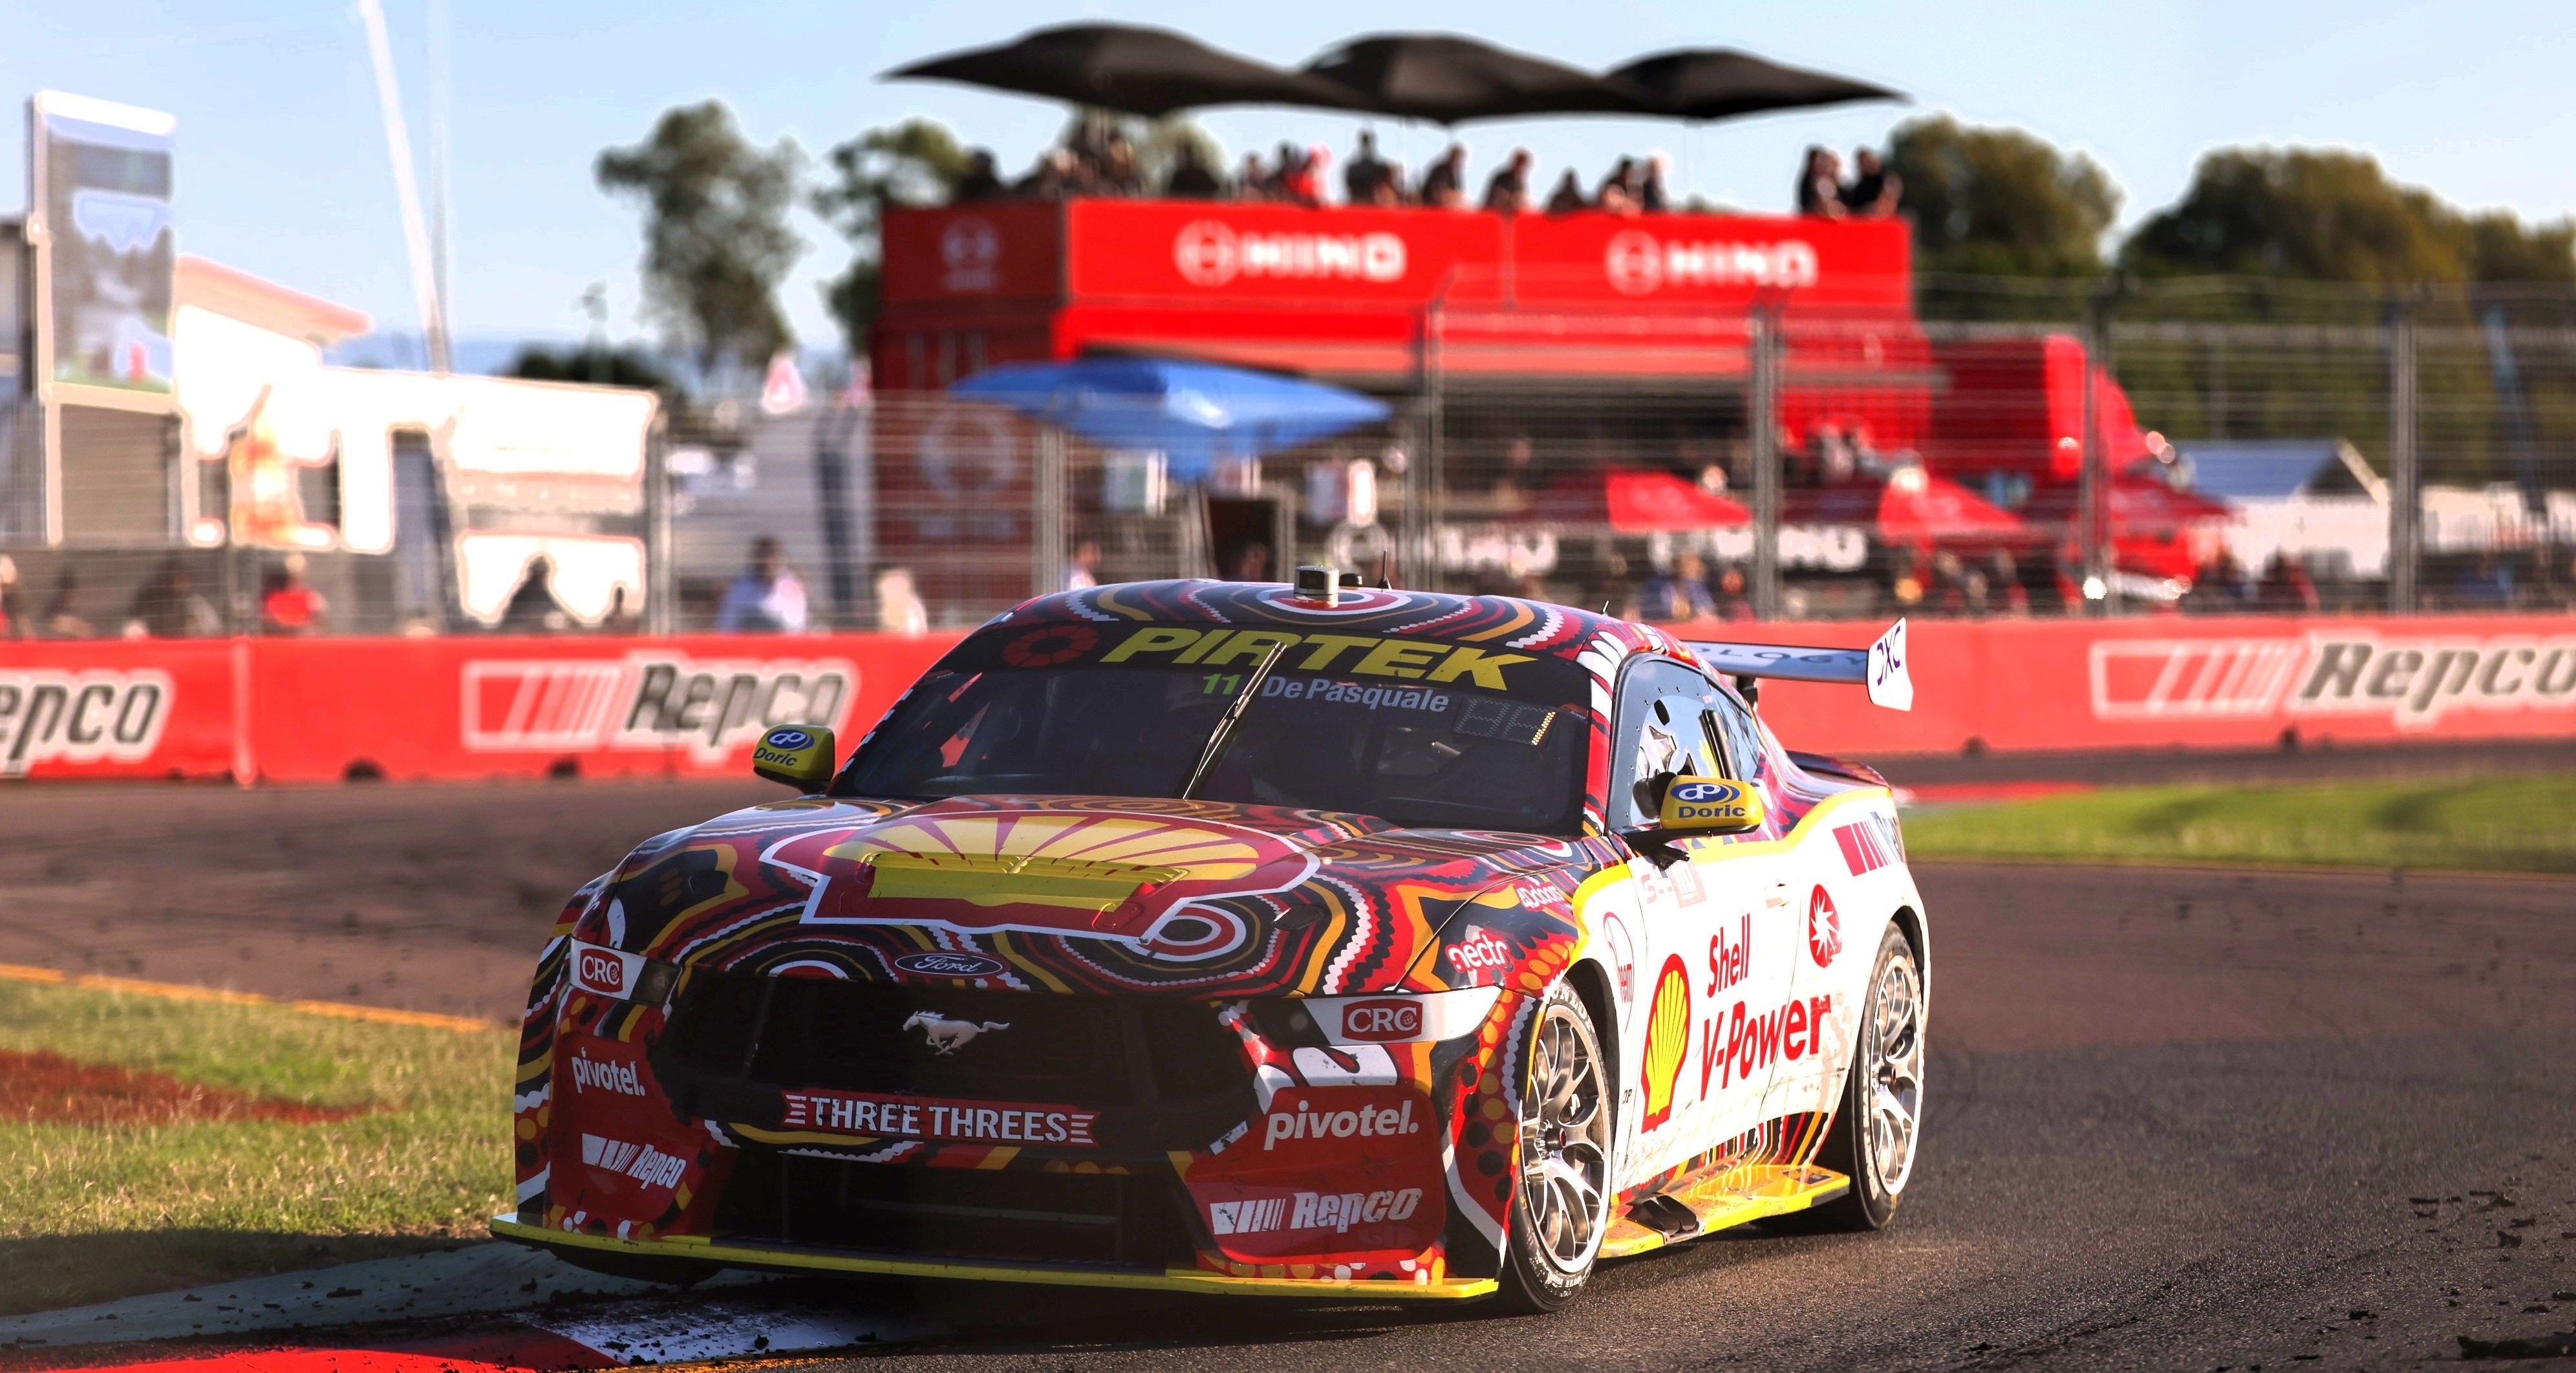 Ford wins with De Pasquale breaking through for Mustang victory in Townsville